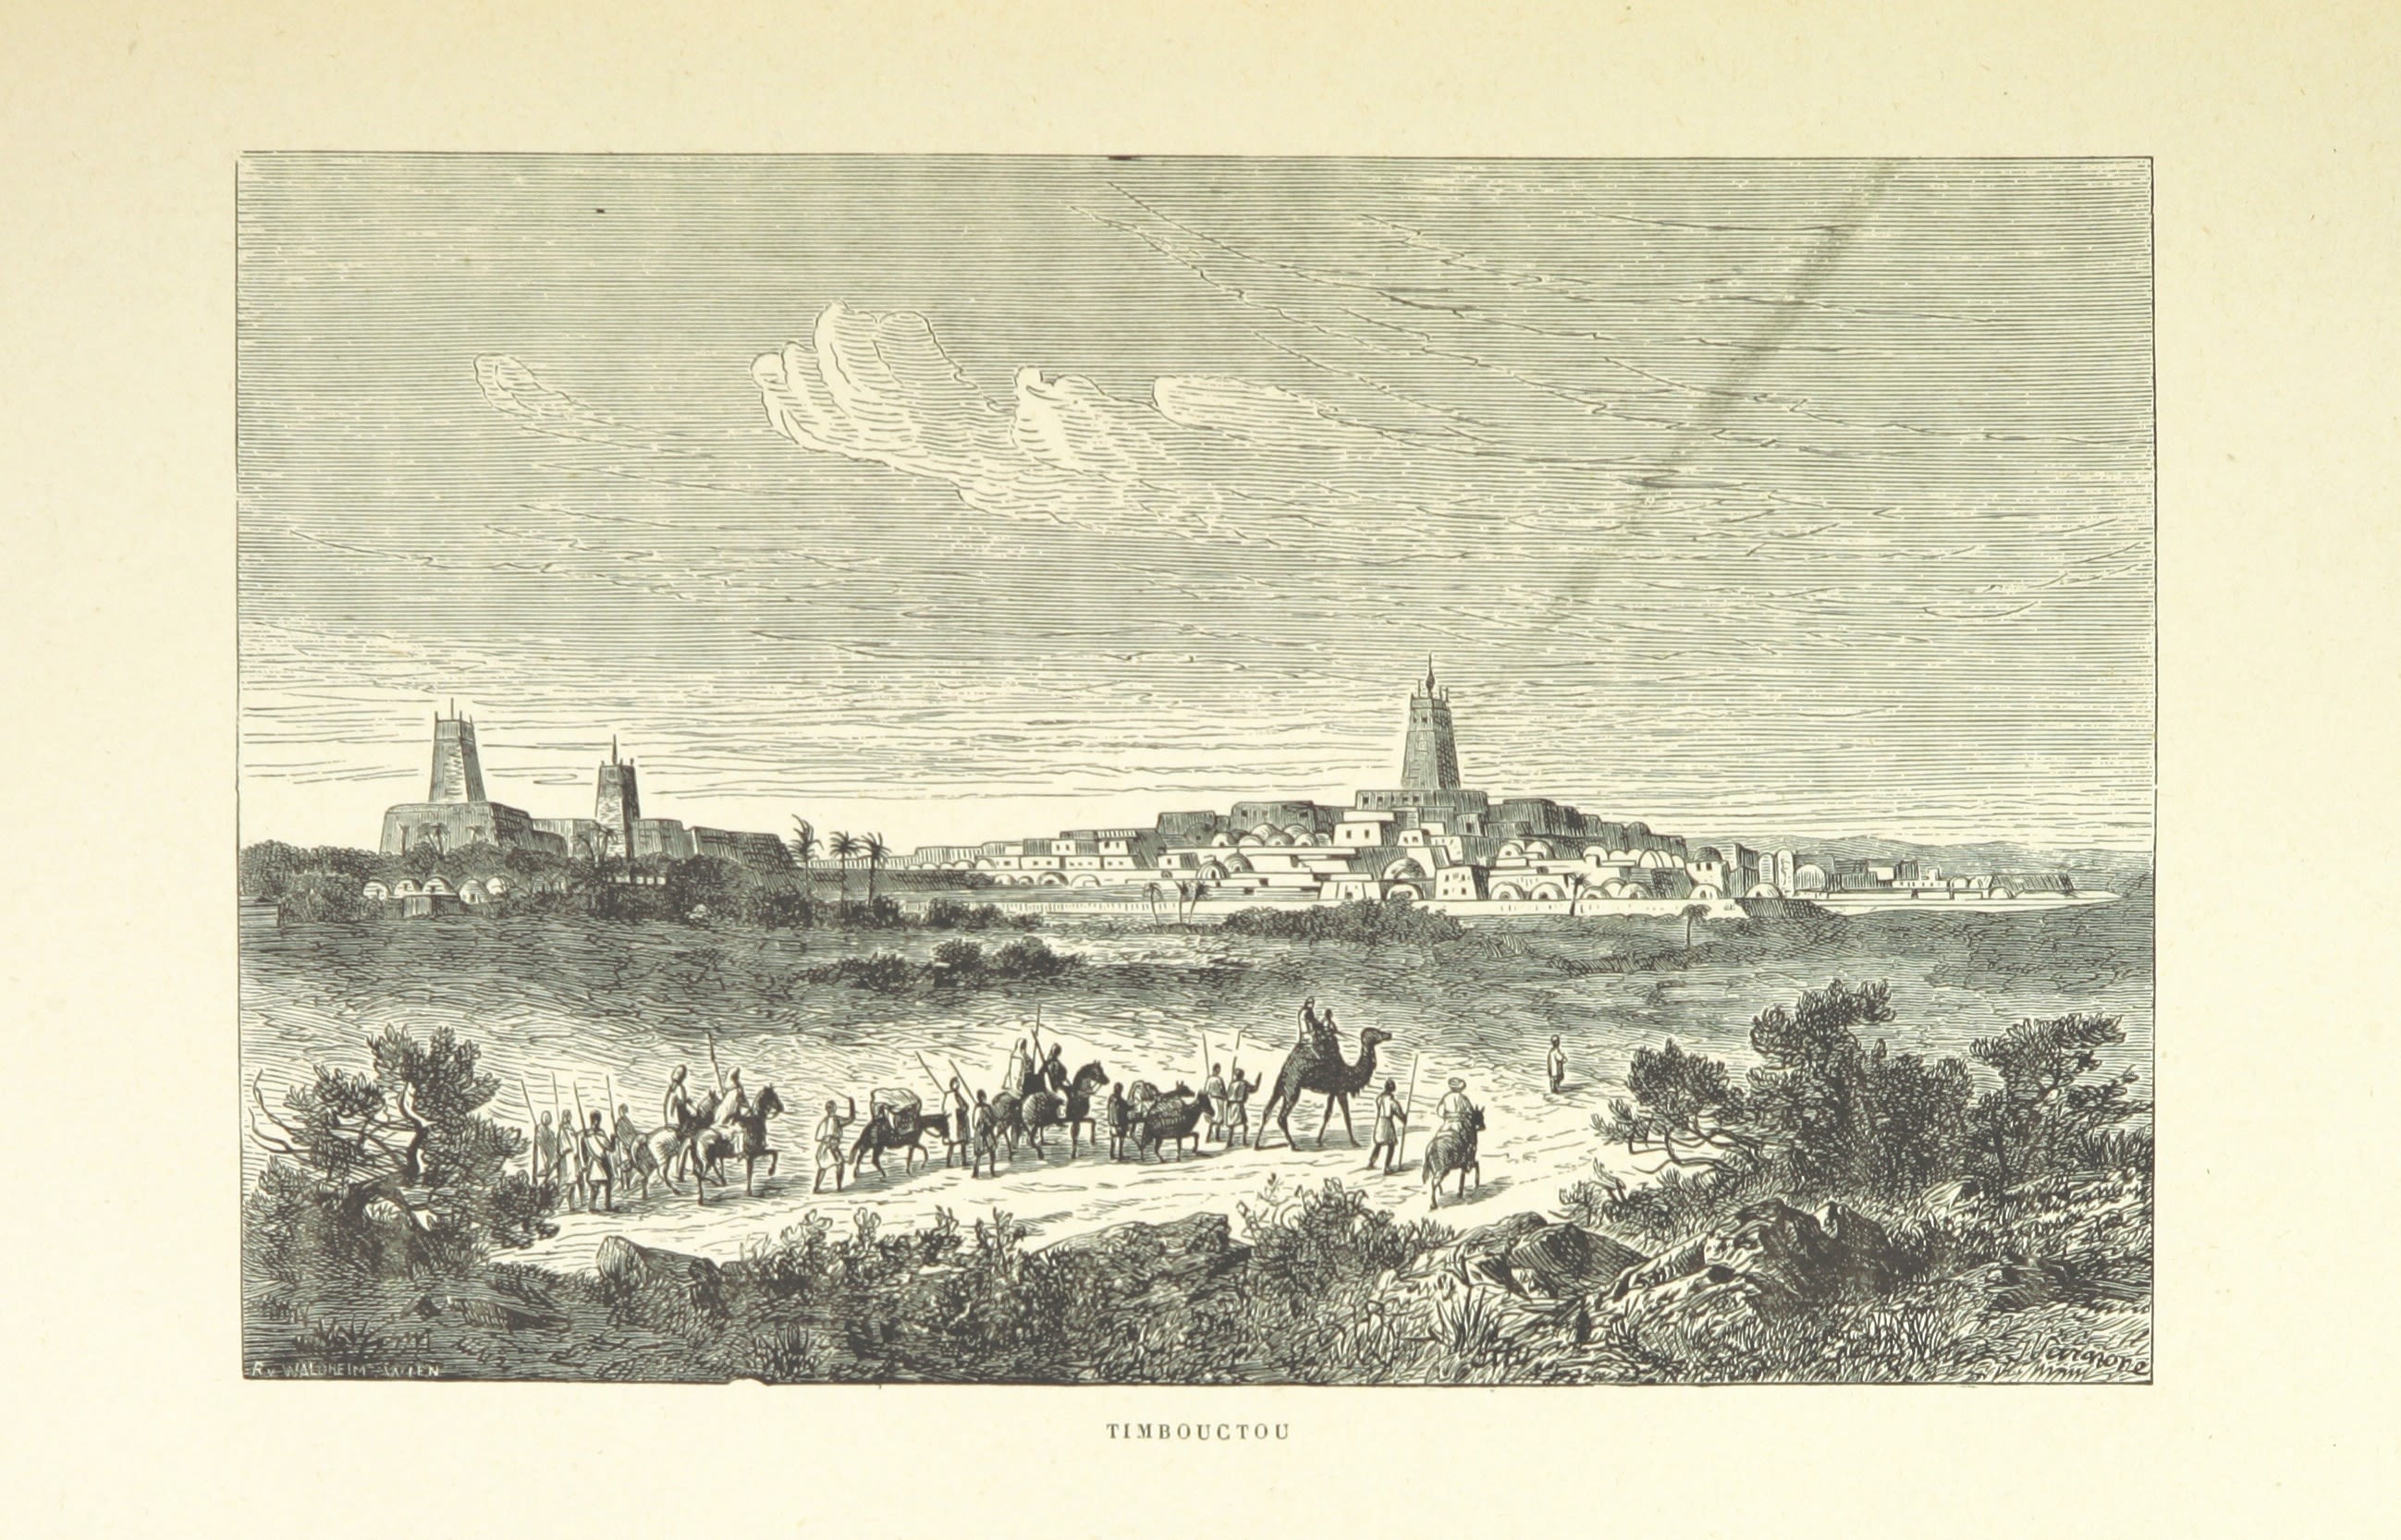 black and white illustration of a city in the desert with a line of people and camels in front